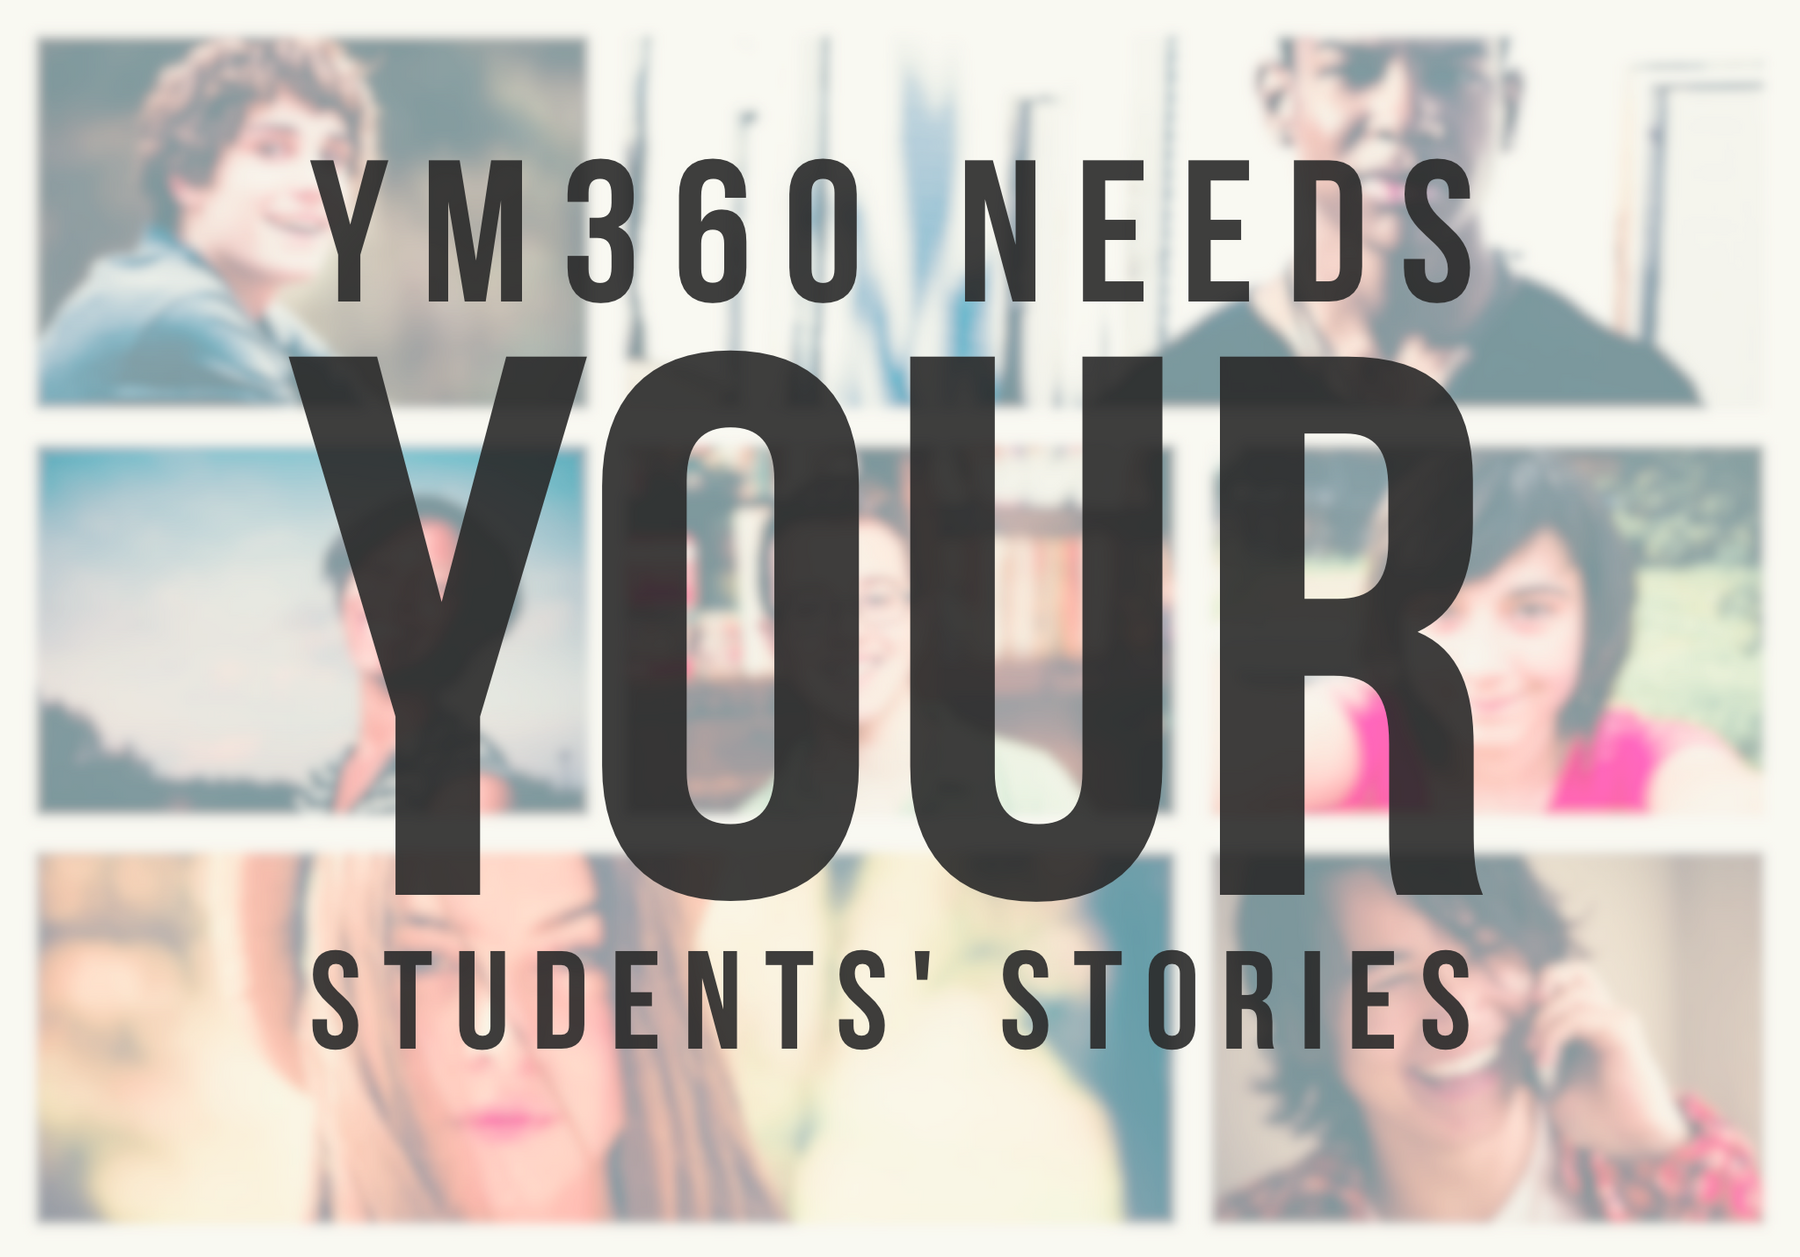 YM360 Needs Your Students' Stories